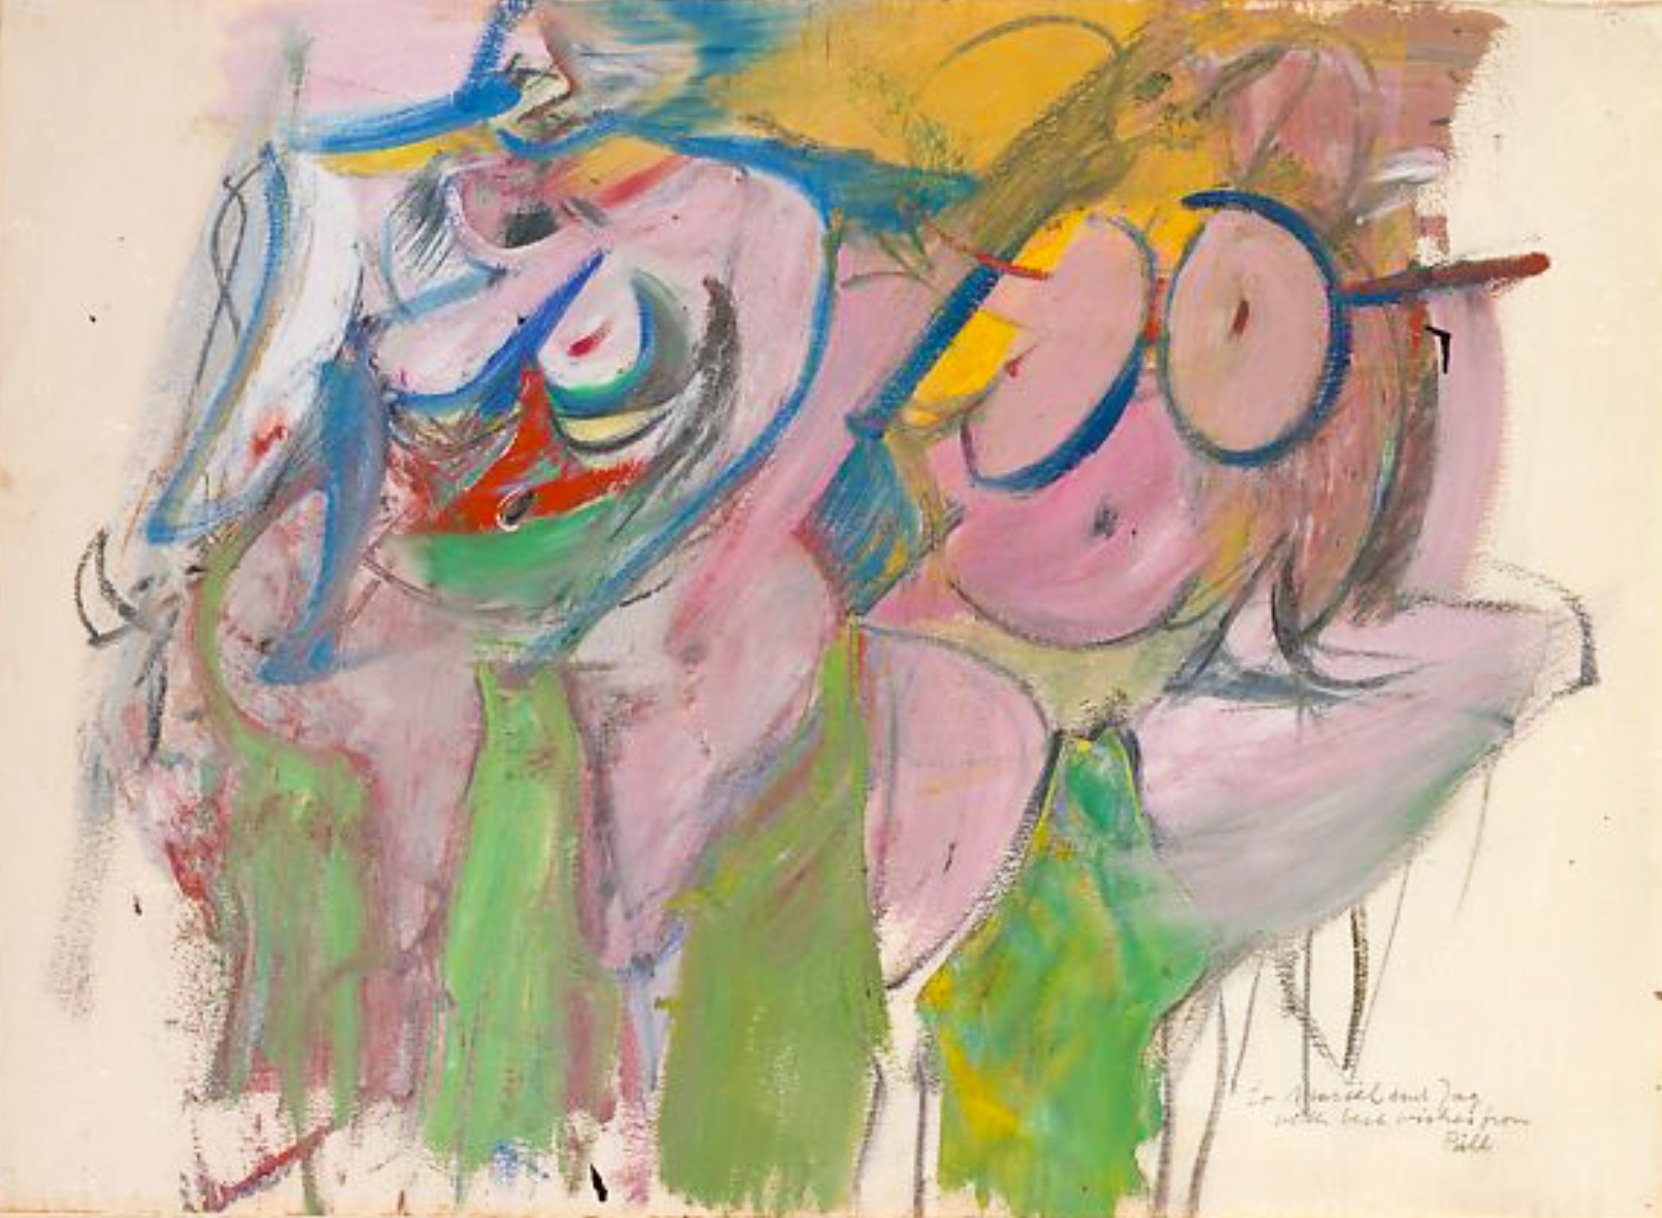 An abstract painting by Willem de Kooning with pastel colors, lines, curves, and human-like female shapes.